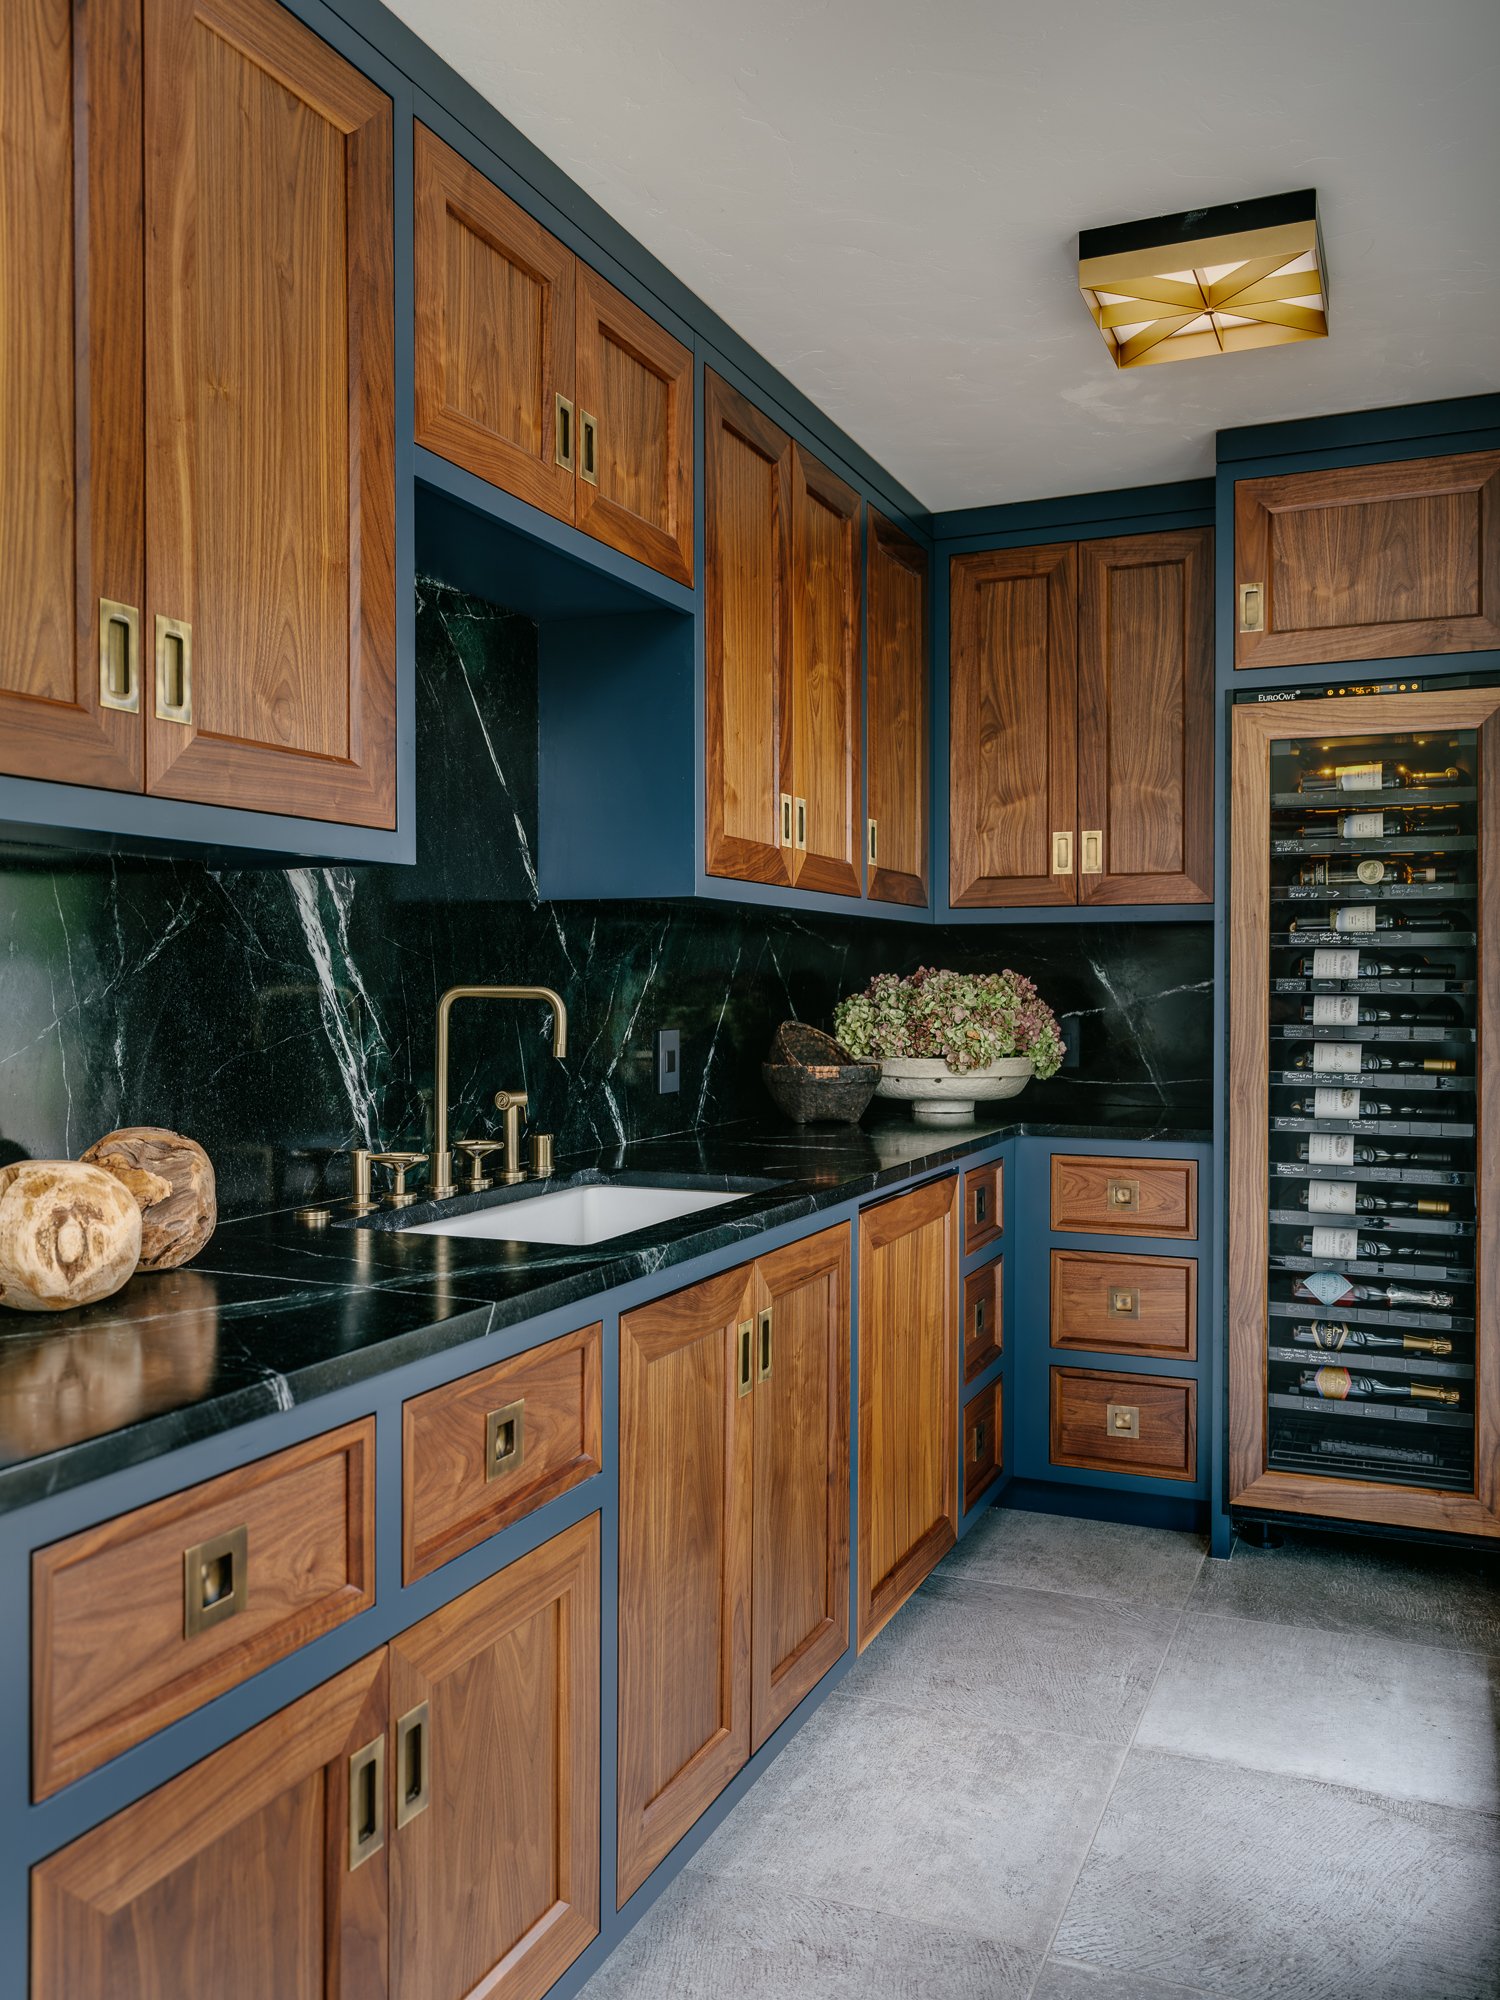 This is the butler’s pantry of my dreams...